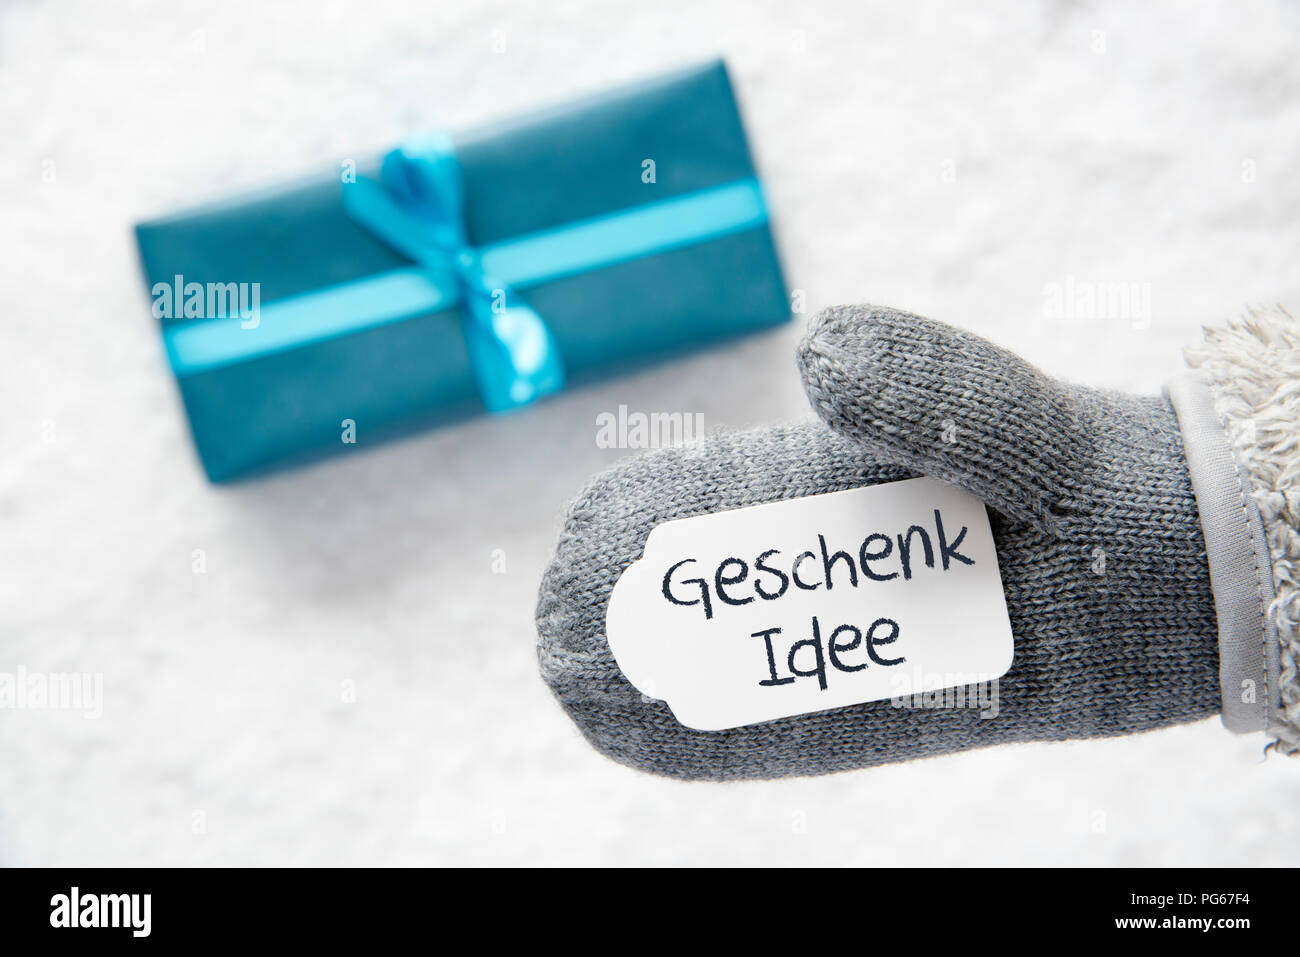 Turquoise Gift, Glove, Geschenk Idee Means Gift Idea Stock Photo